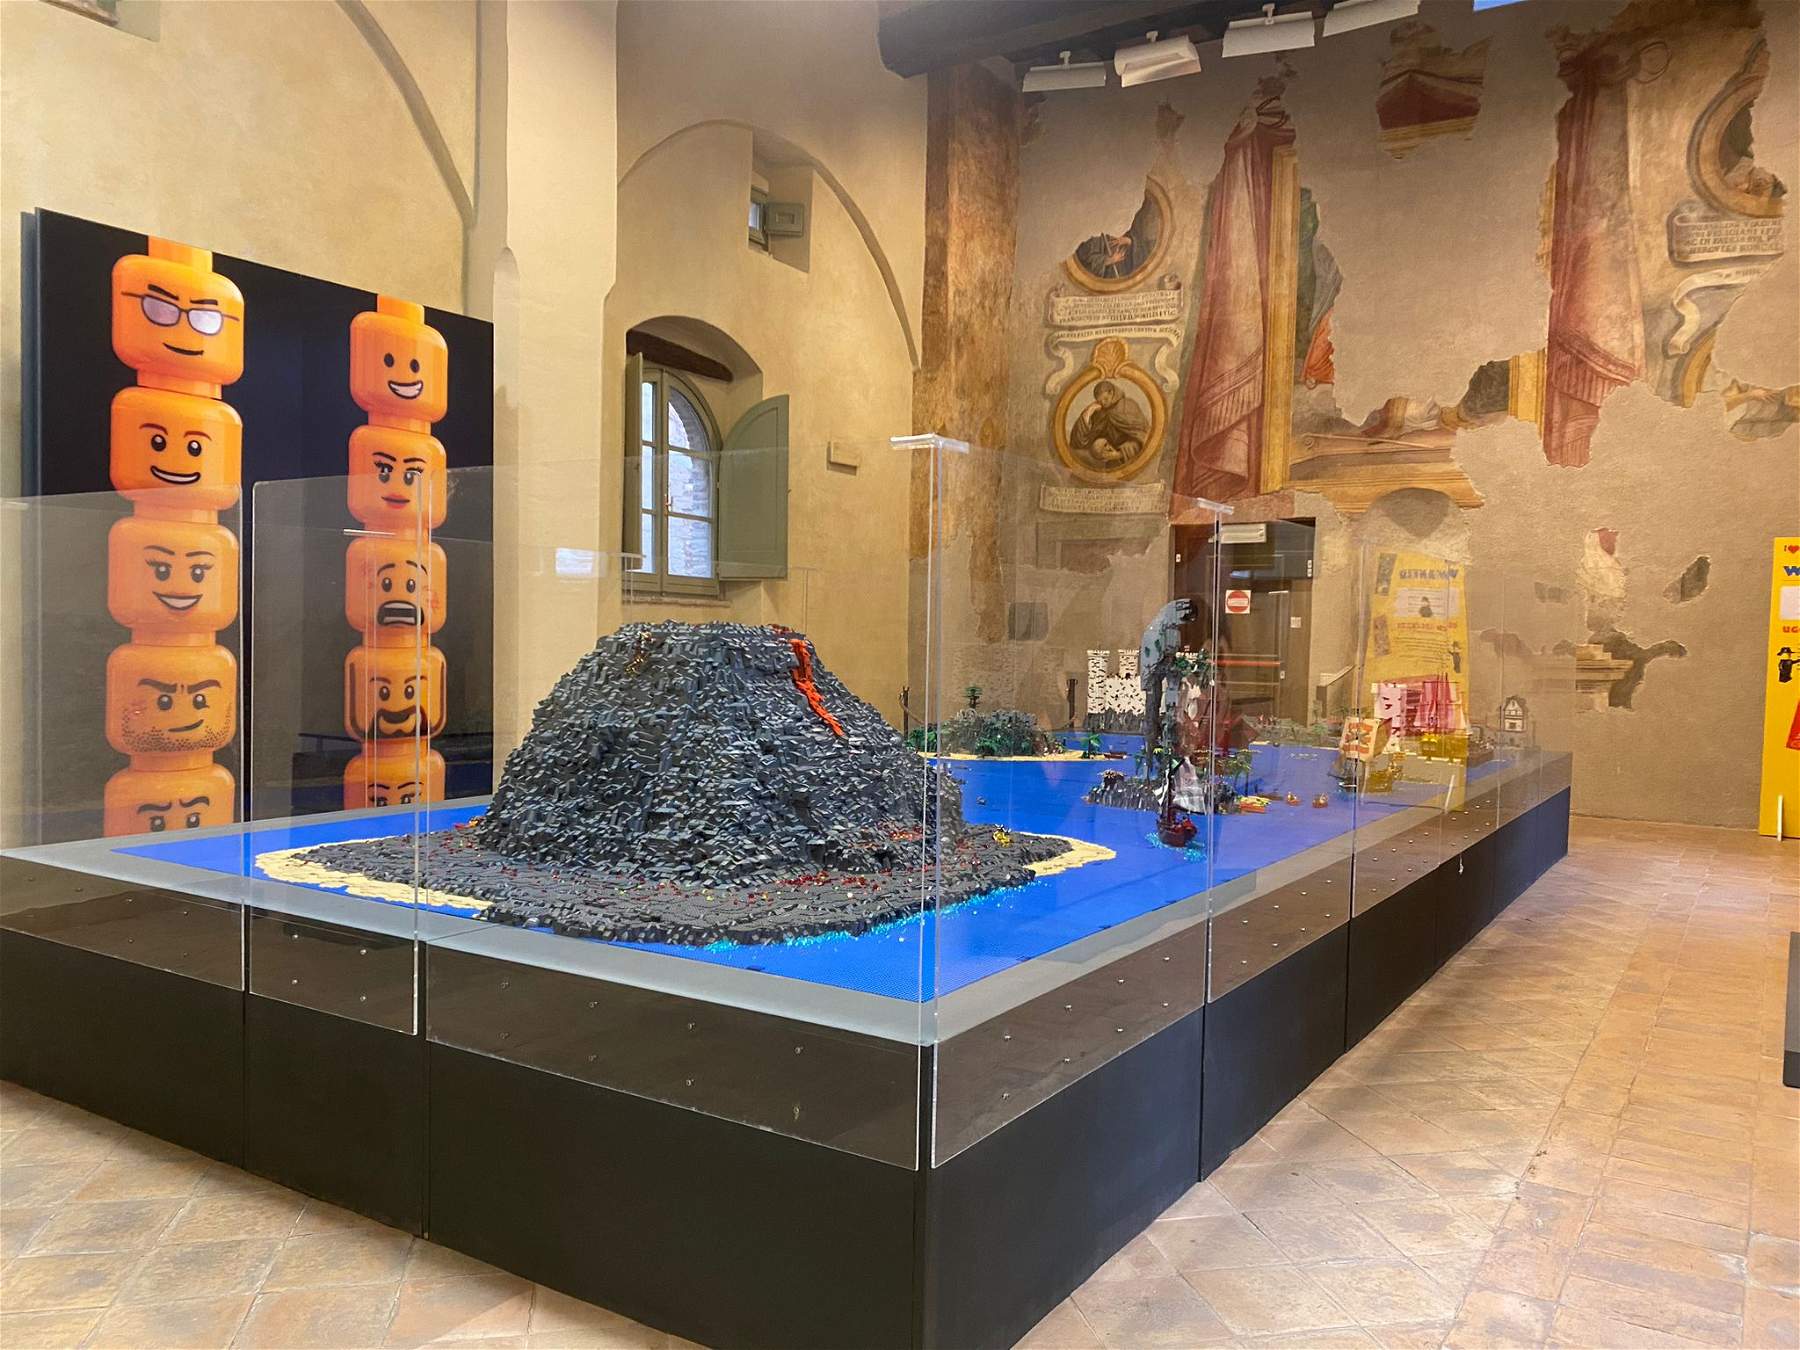 Foligno, at Palazzo Trinci comes I love Lego: installations and paintings made with the famous bricks